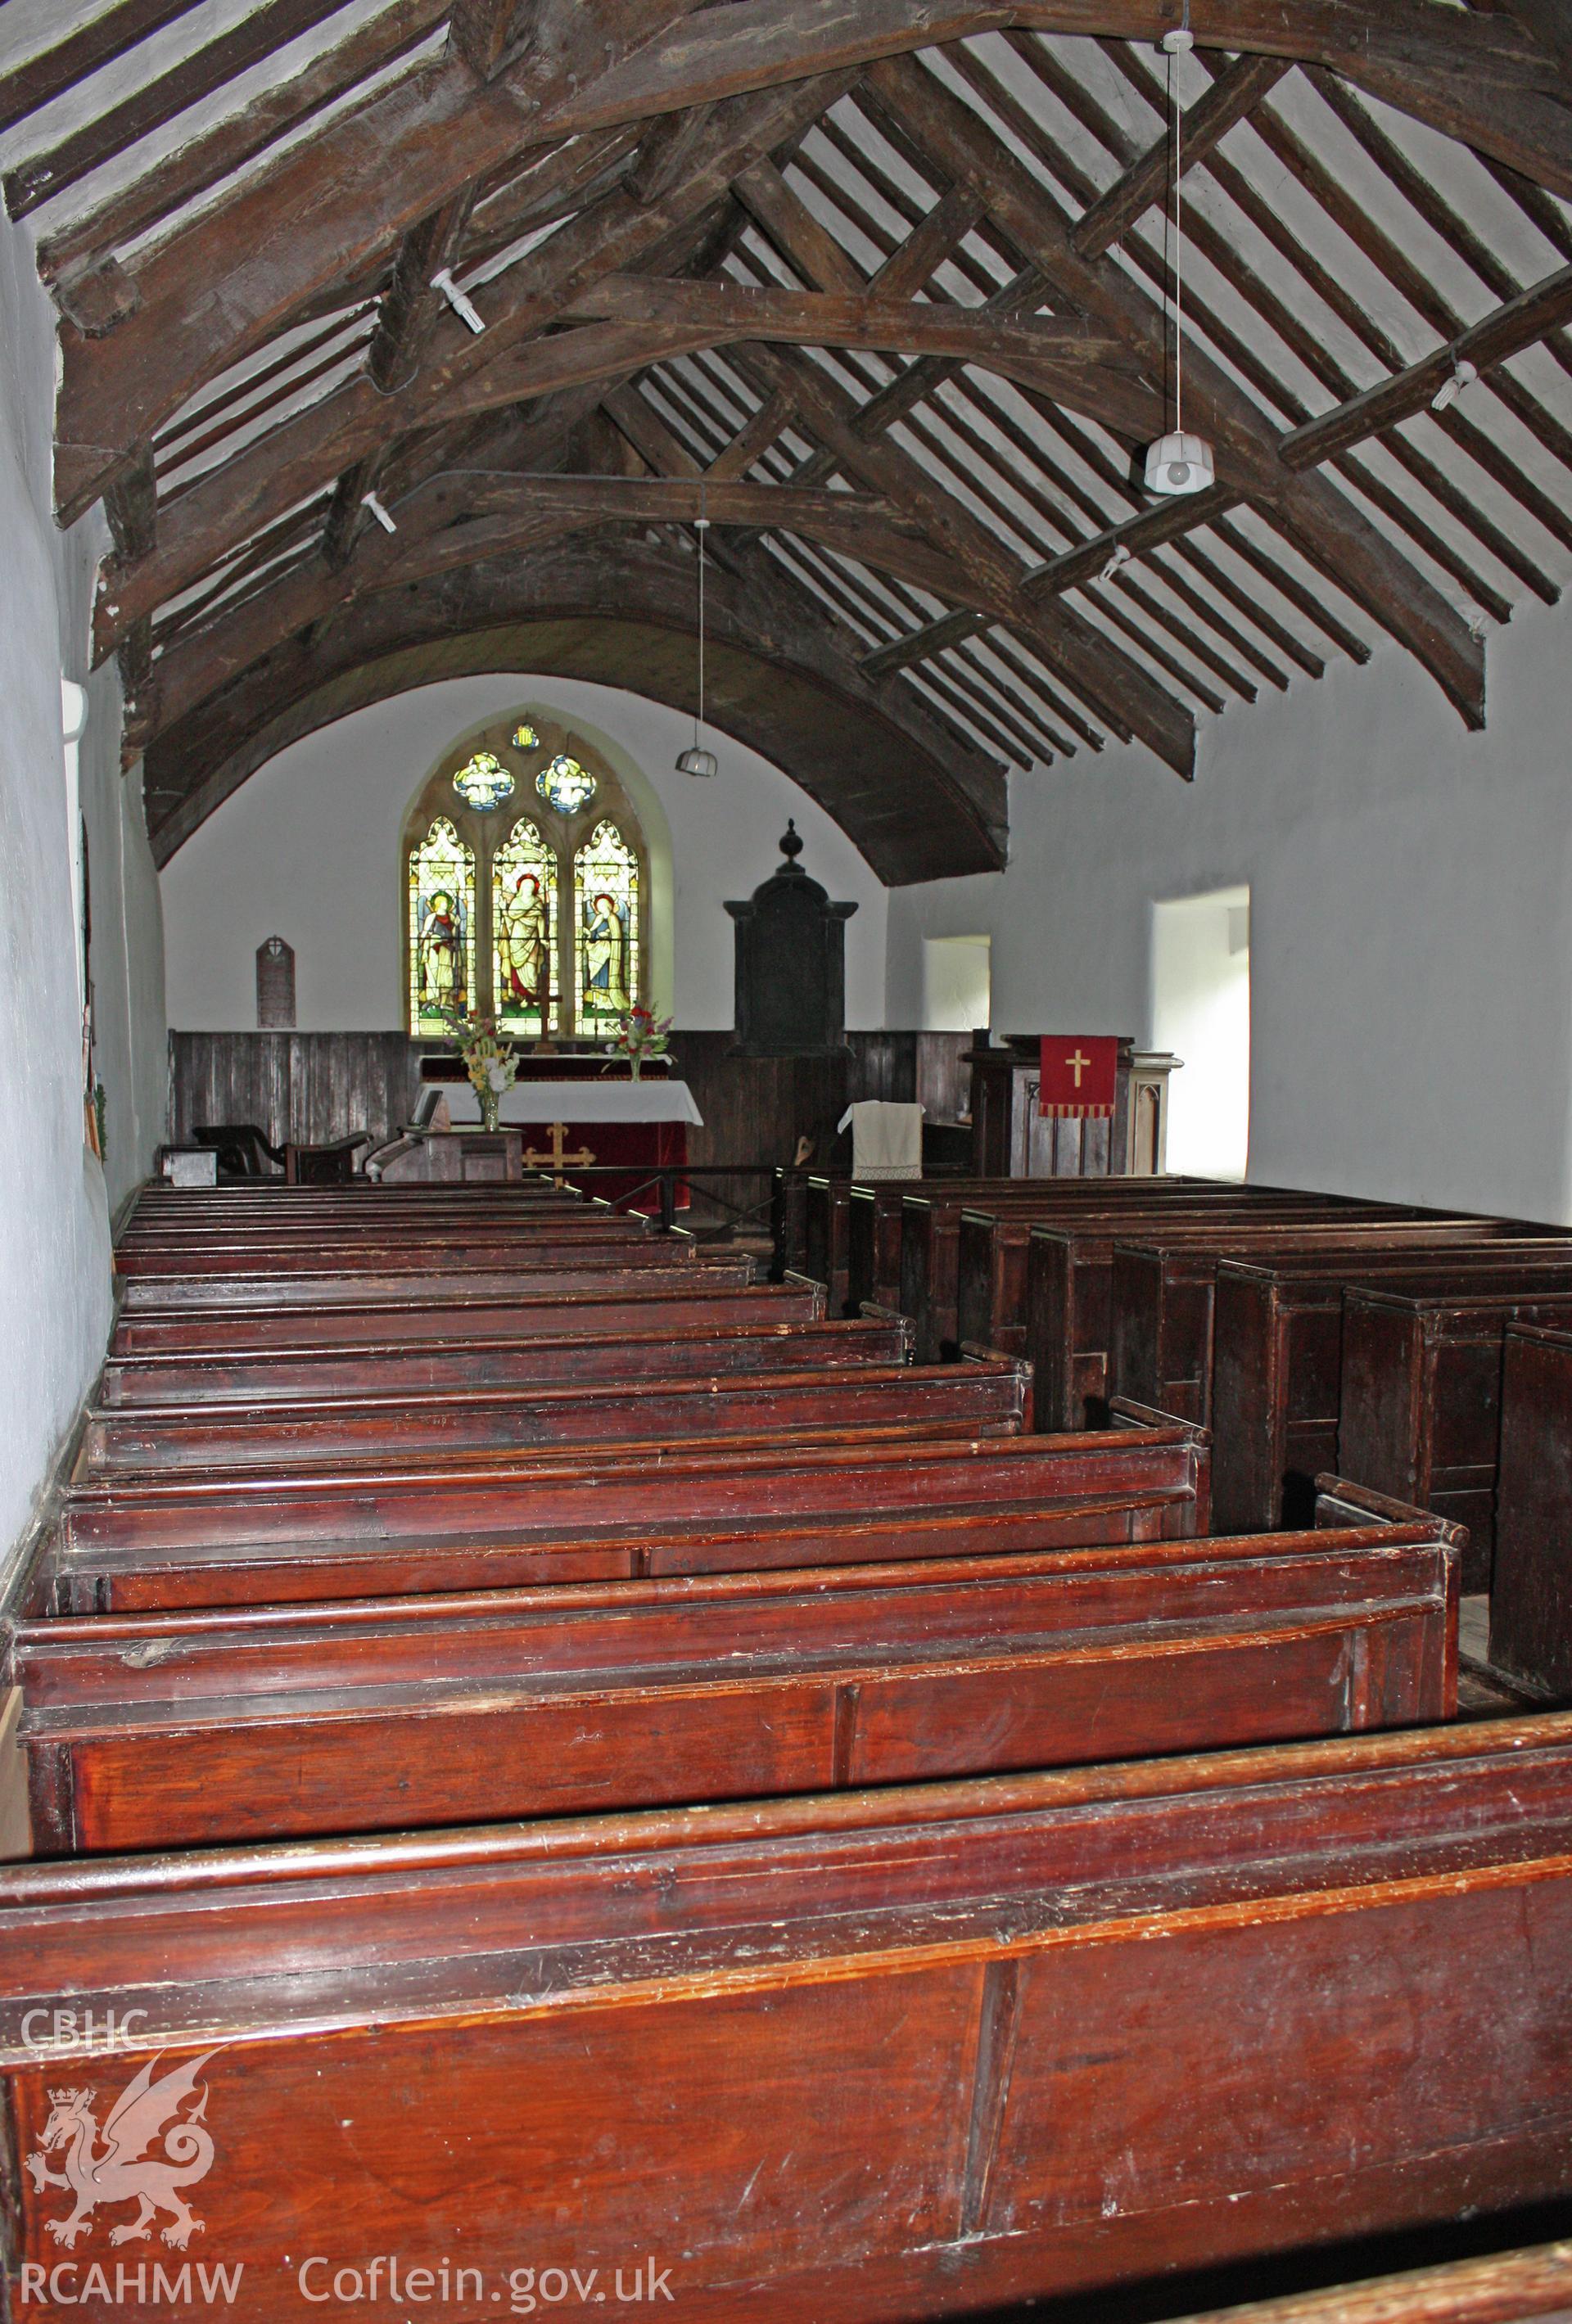 Interior looking south-east